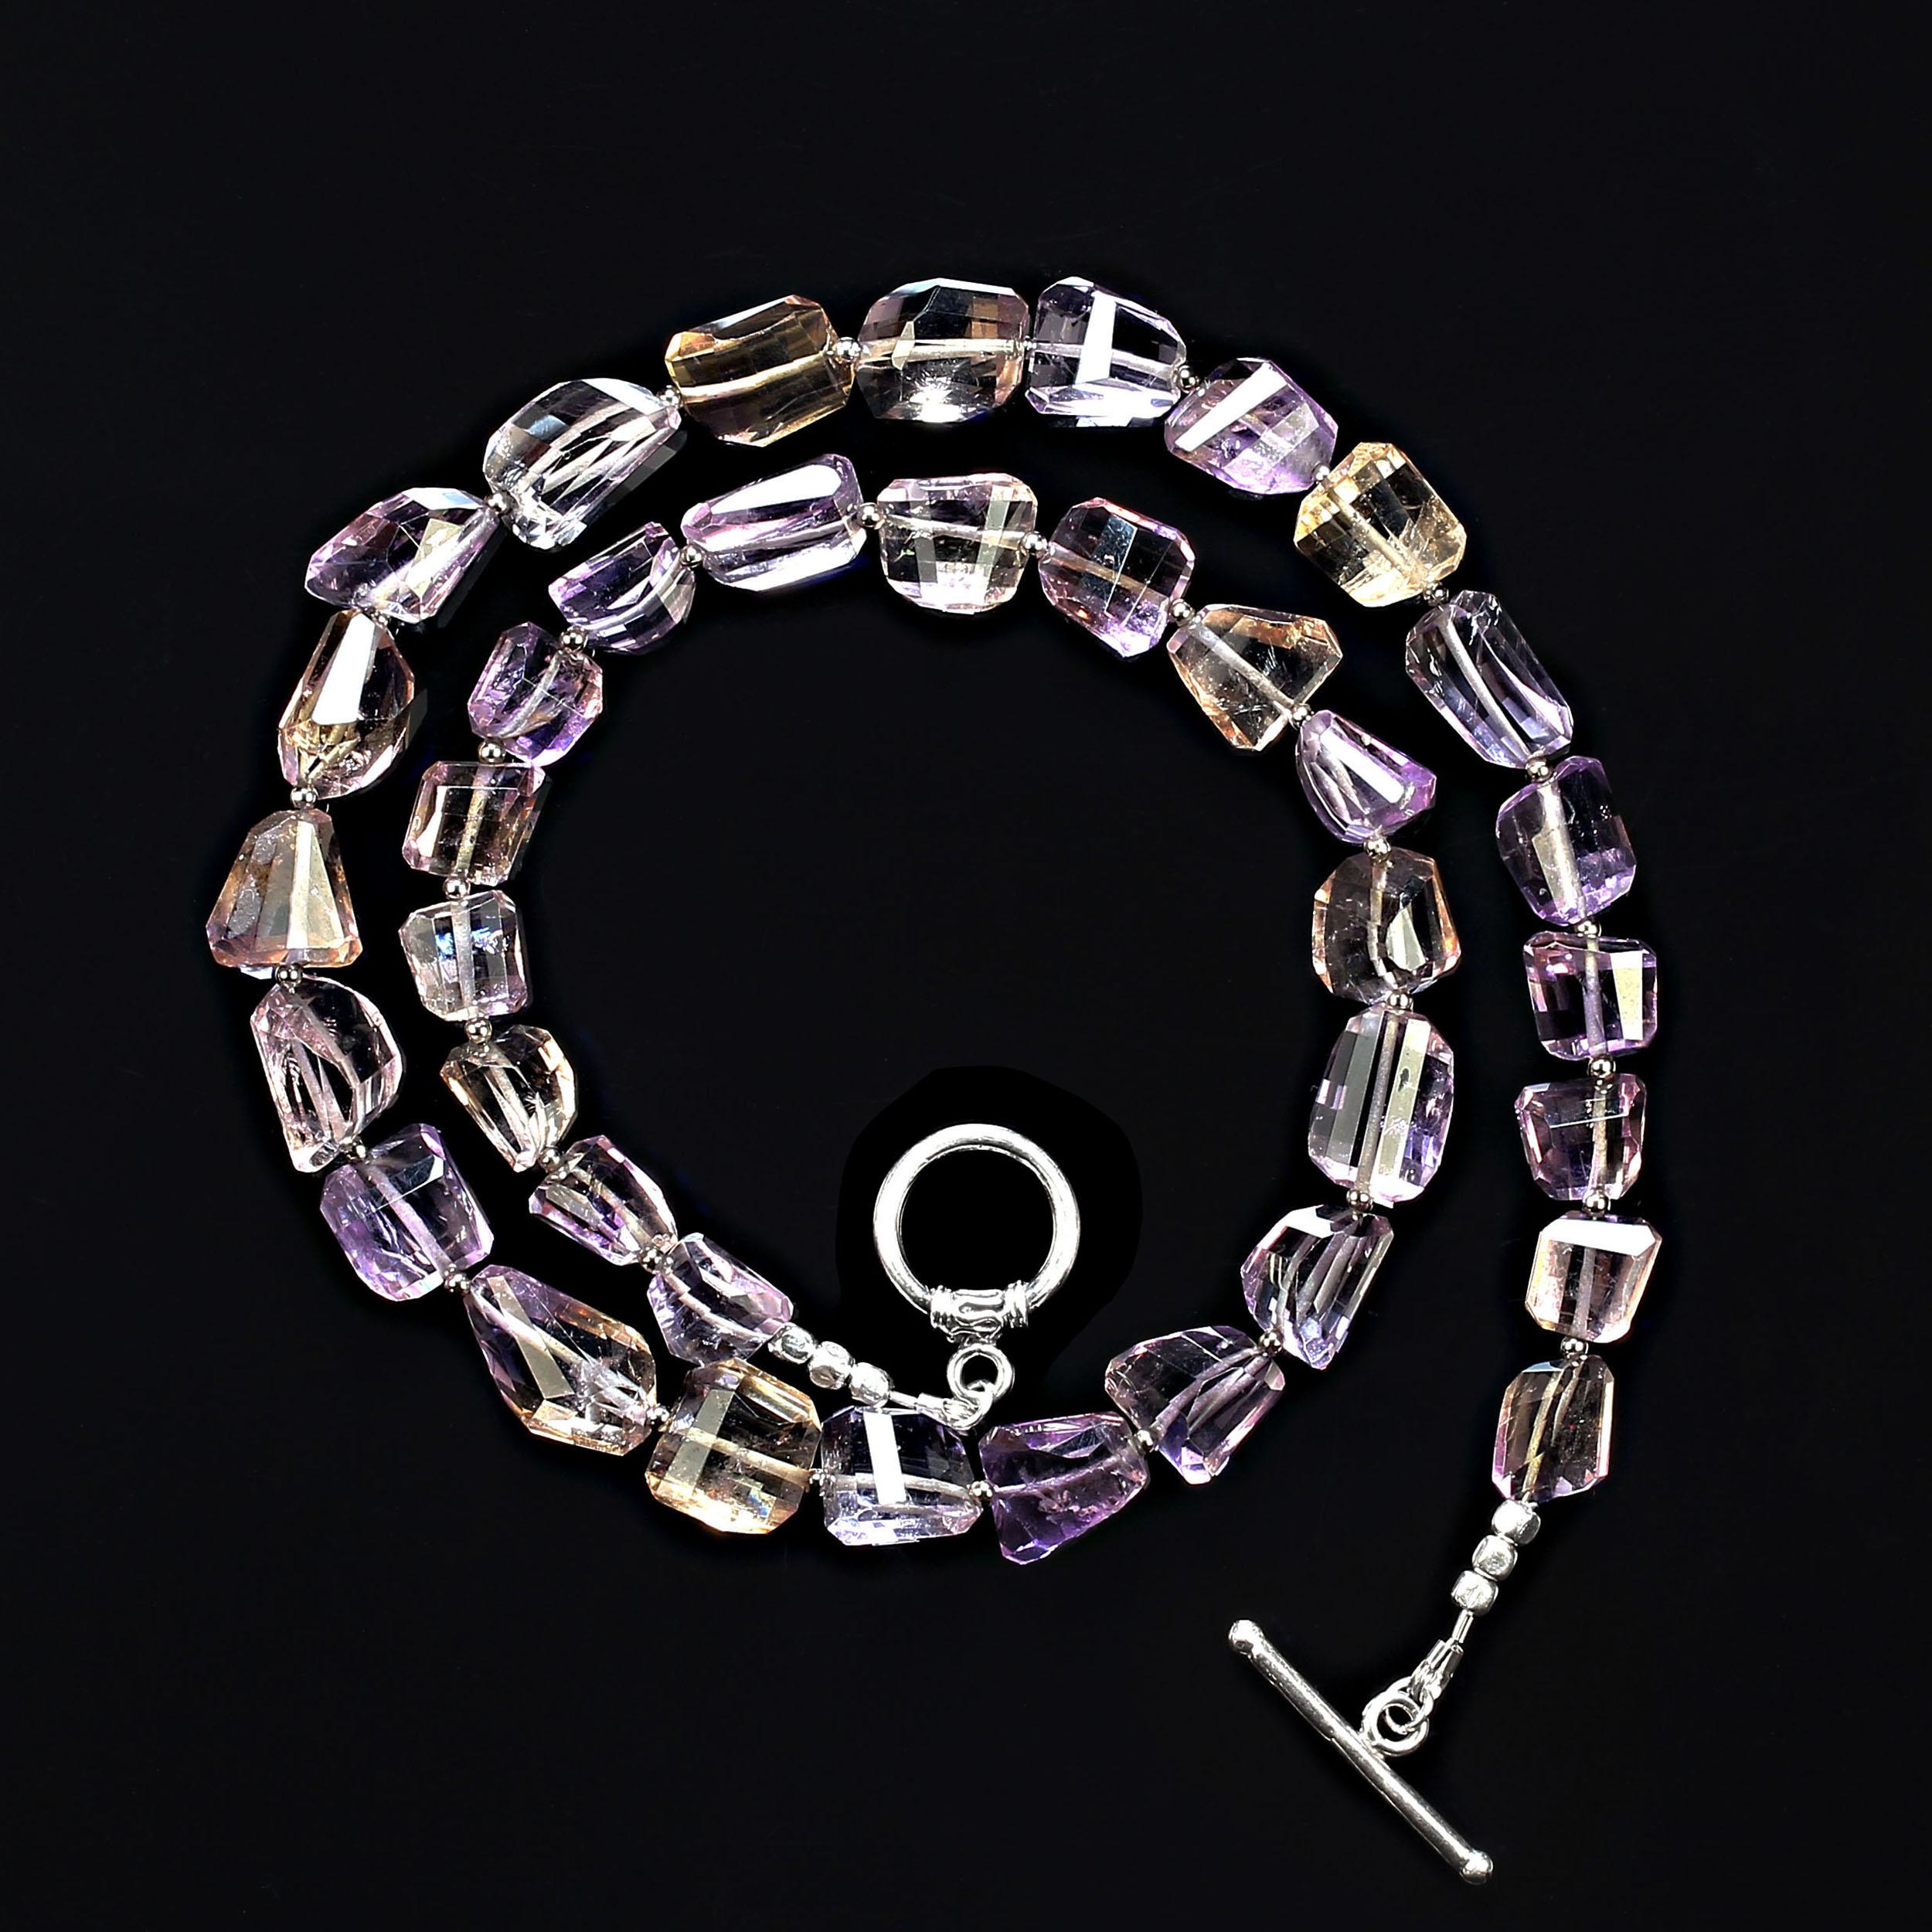 20 inch faceted freeform Ametrine with time silver tone accent. The clasp is a silver tone easy to use toggle.  Remember that Ametrine is a combination of amethyst and citrine in the same gemstone. MN3555  